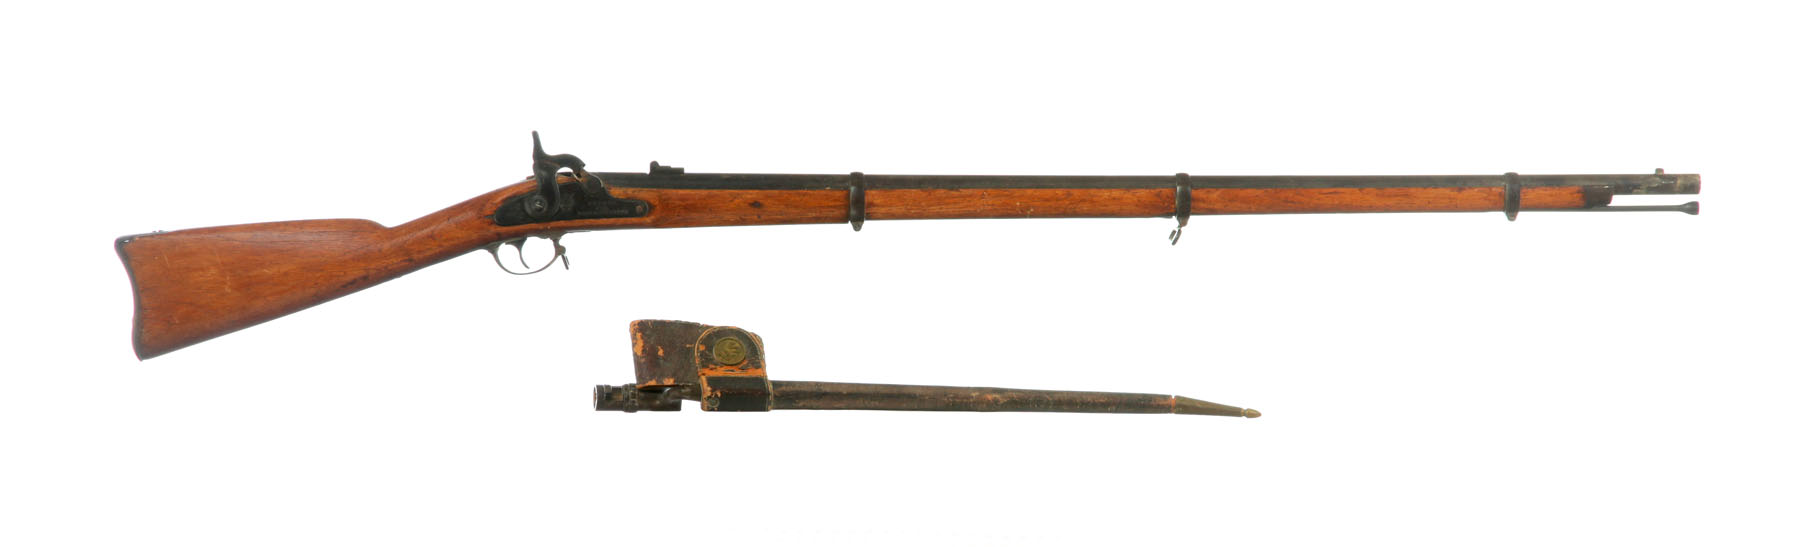 CLEMENT AND NORRIS MODEL 1861 RIFLE MUSKET  12384b